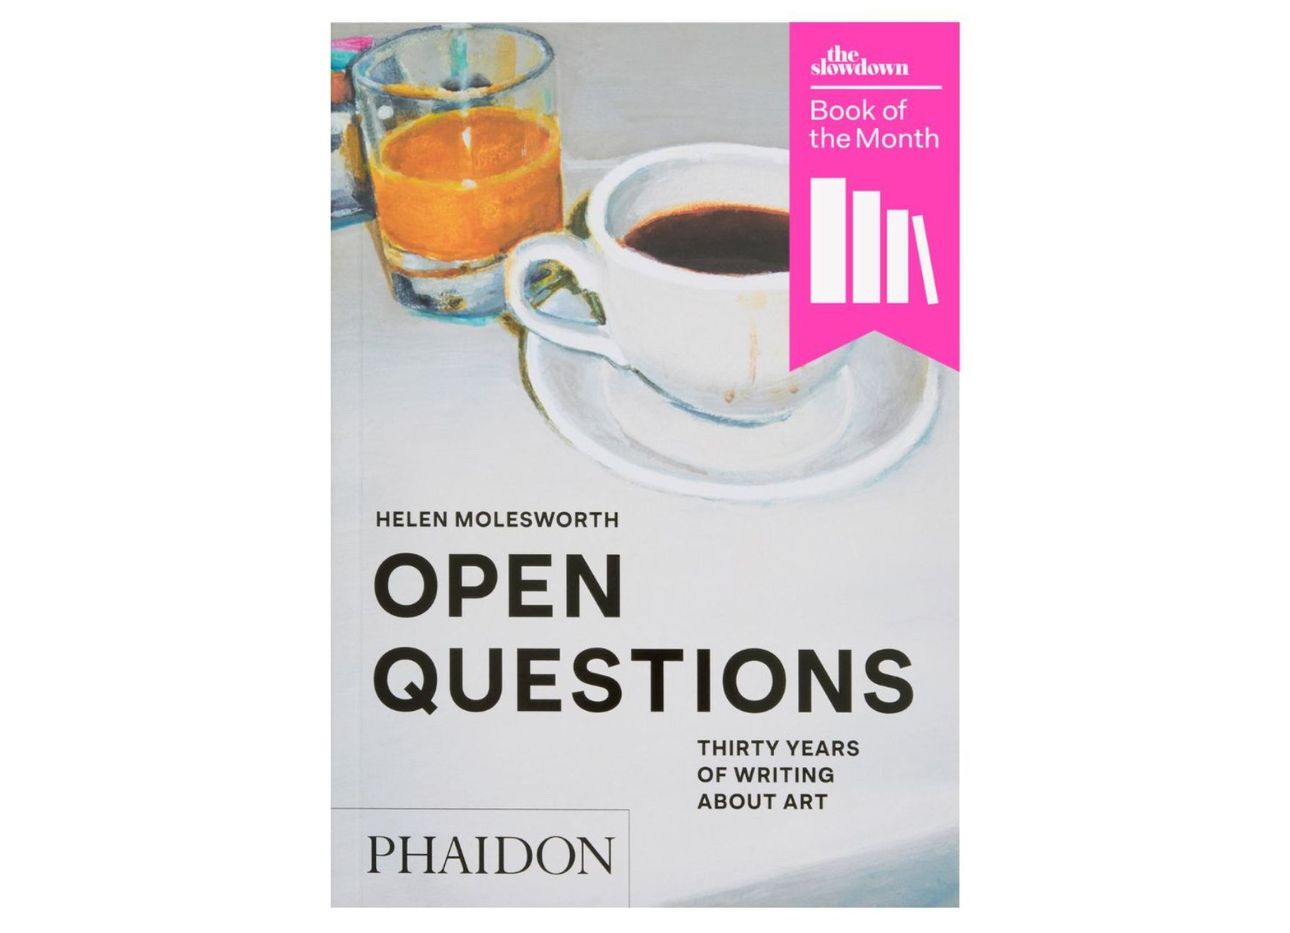 Cover of “Open Questions: Thirty Years of Writing About Art” by Helen Molesworth. (Courtesy Phaidon)